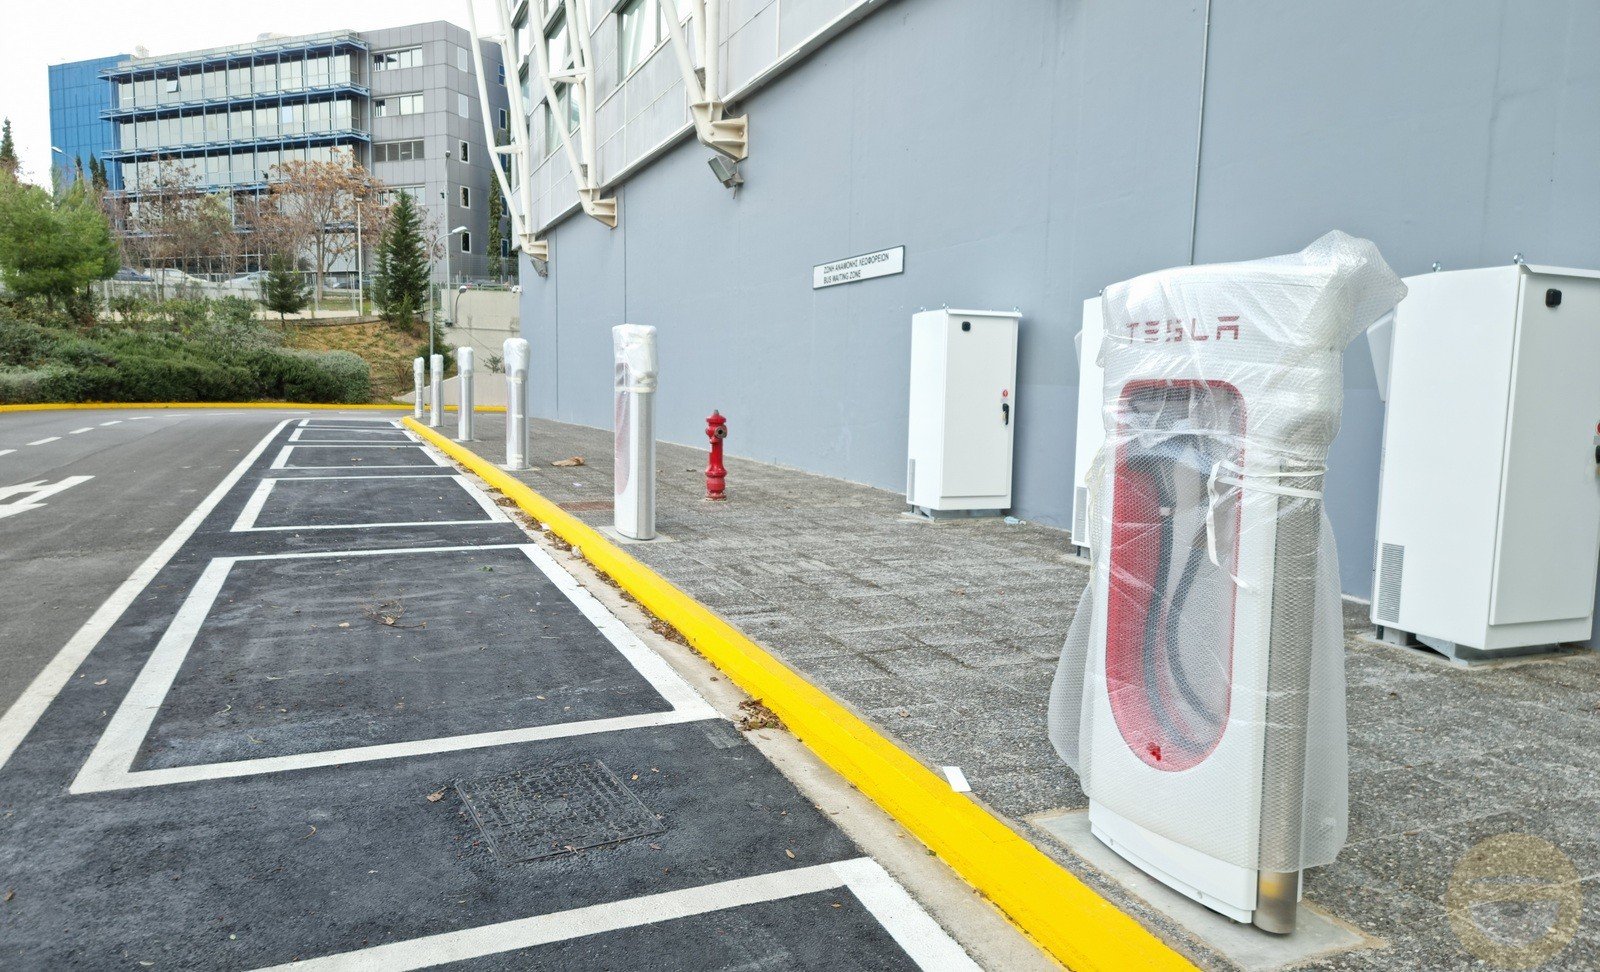 More information about "Εγκαταστάθηκαν οι πρώτοι Tesla Superchargers στην Αθήνα"